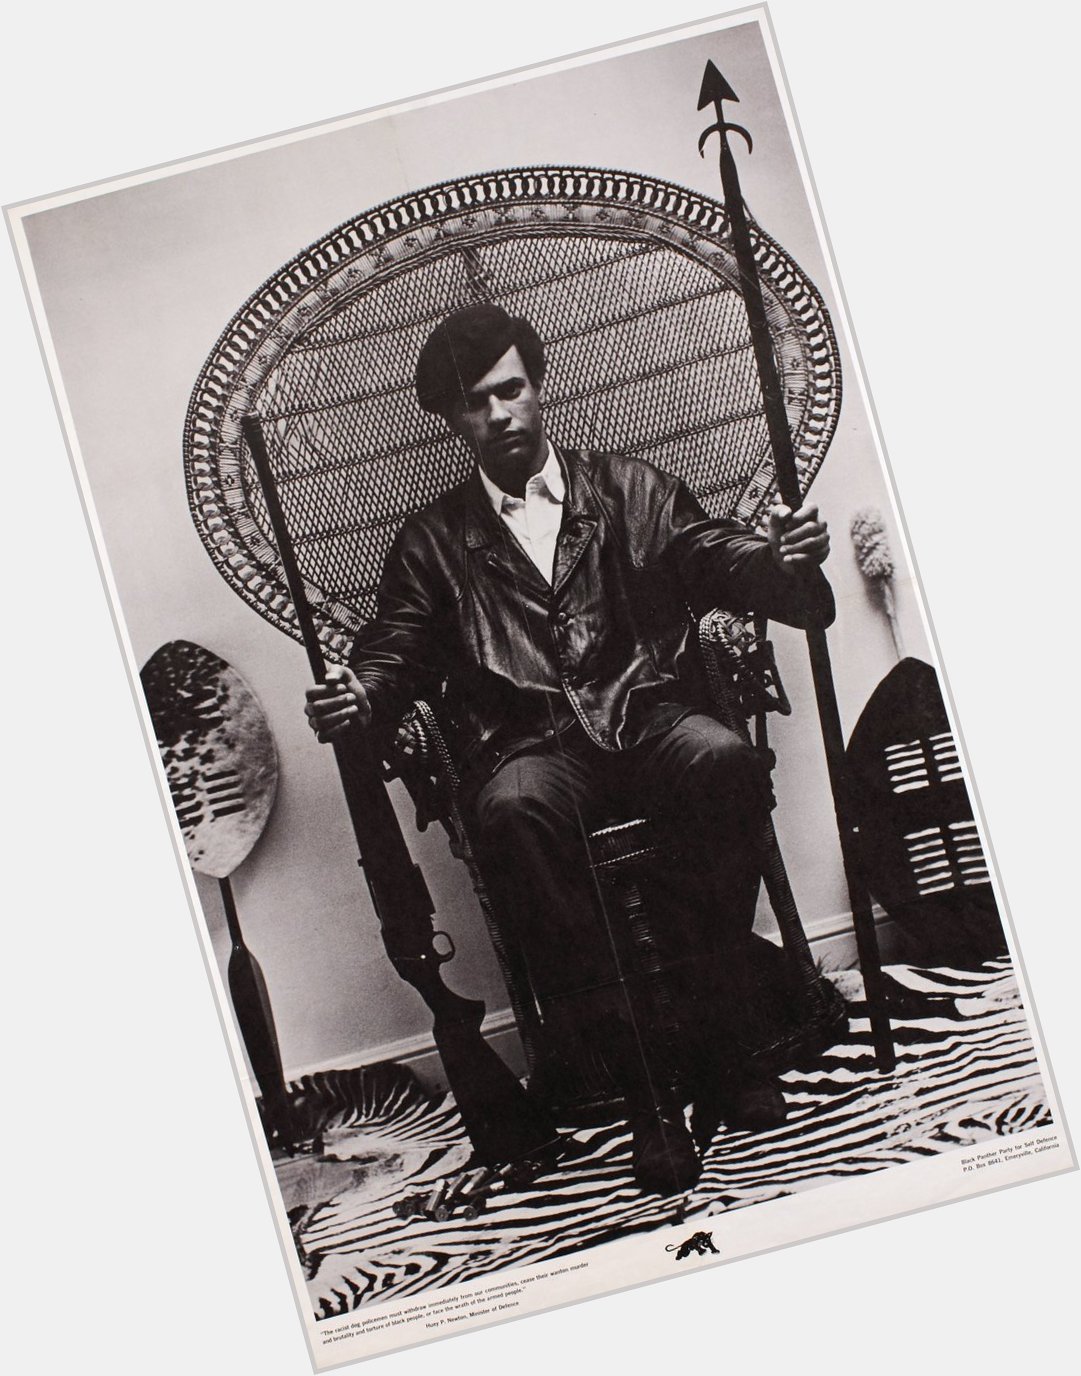 Happy Birthday to the great Huey P. Newton co-creator of the Black Panther party. 